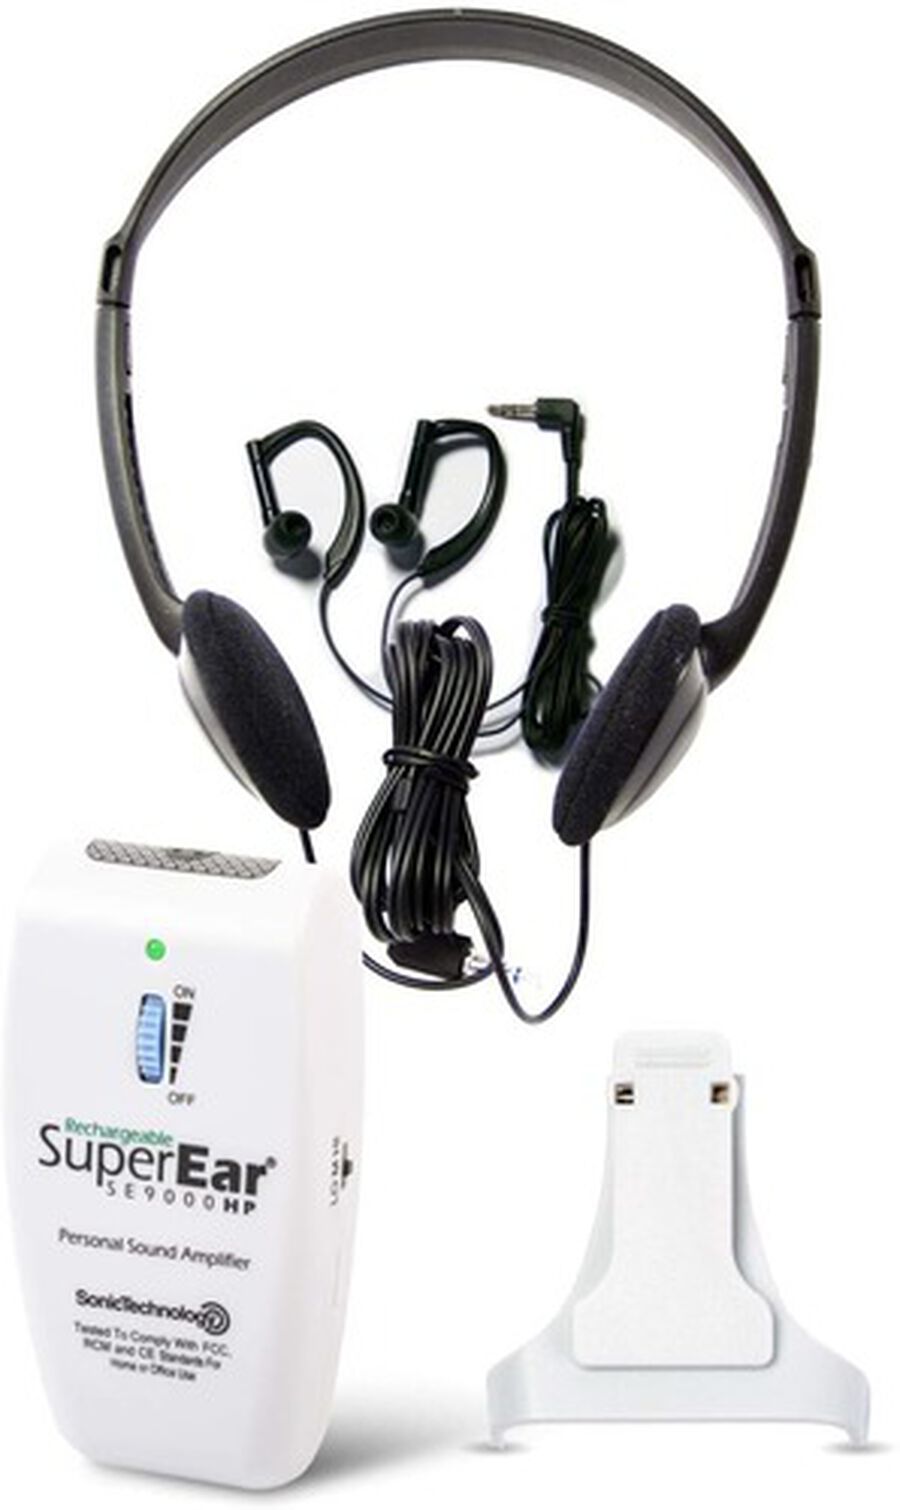 SuperEar SE9000HP Deluxe Rechargeable Personal Sound Amplifier, , large image number 0